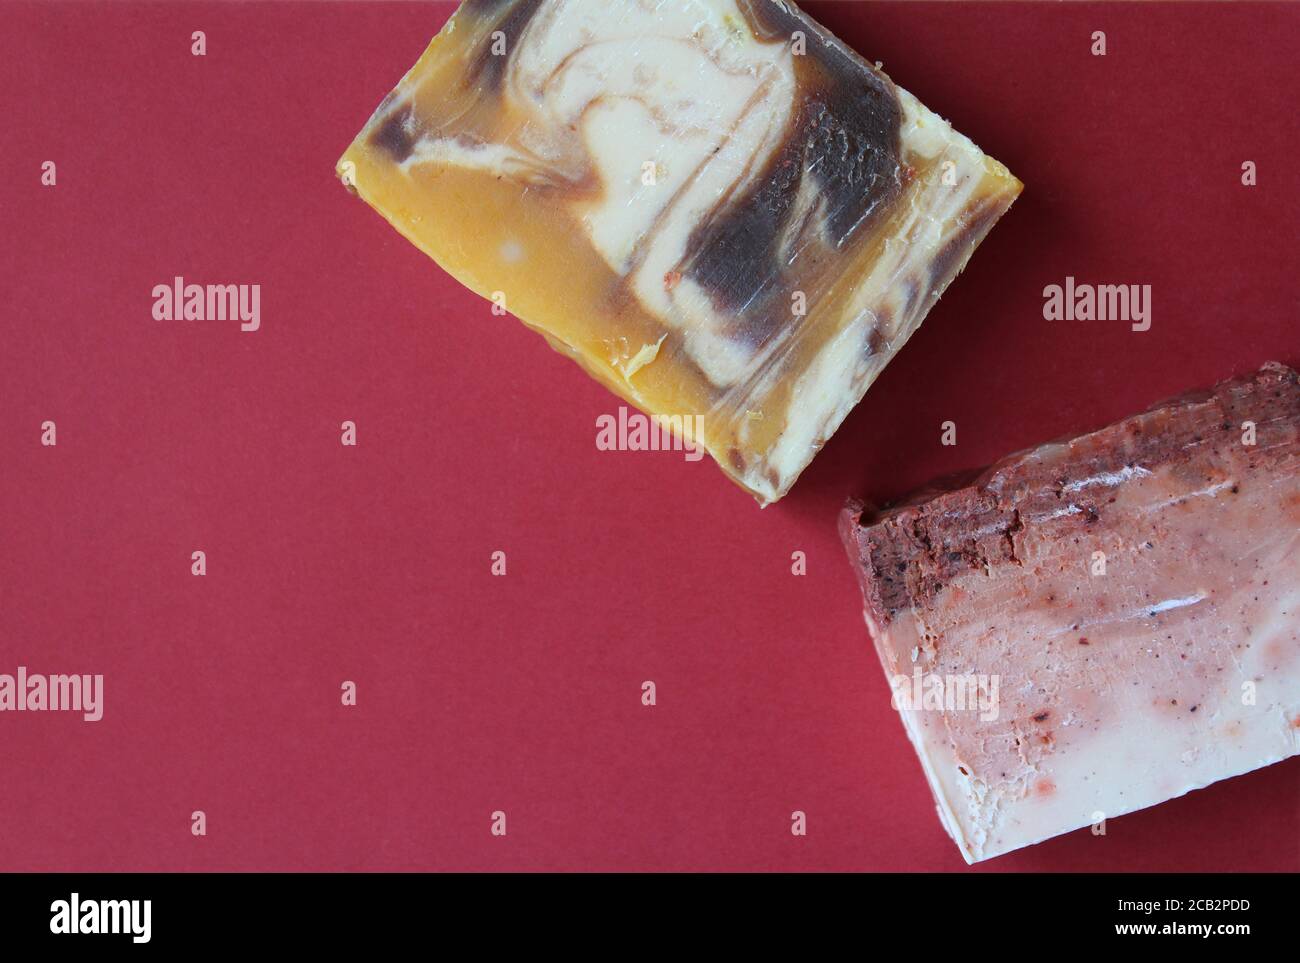 Flat lay blocks of home made soap on a dark red background. Hand made soap with natural ingredients concept, high angle view. Copyspace below left. Stock Photo